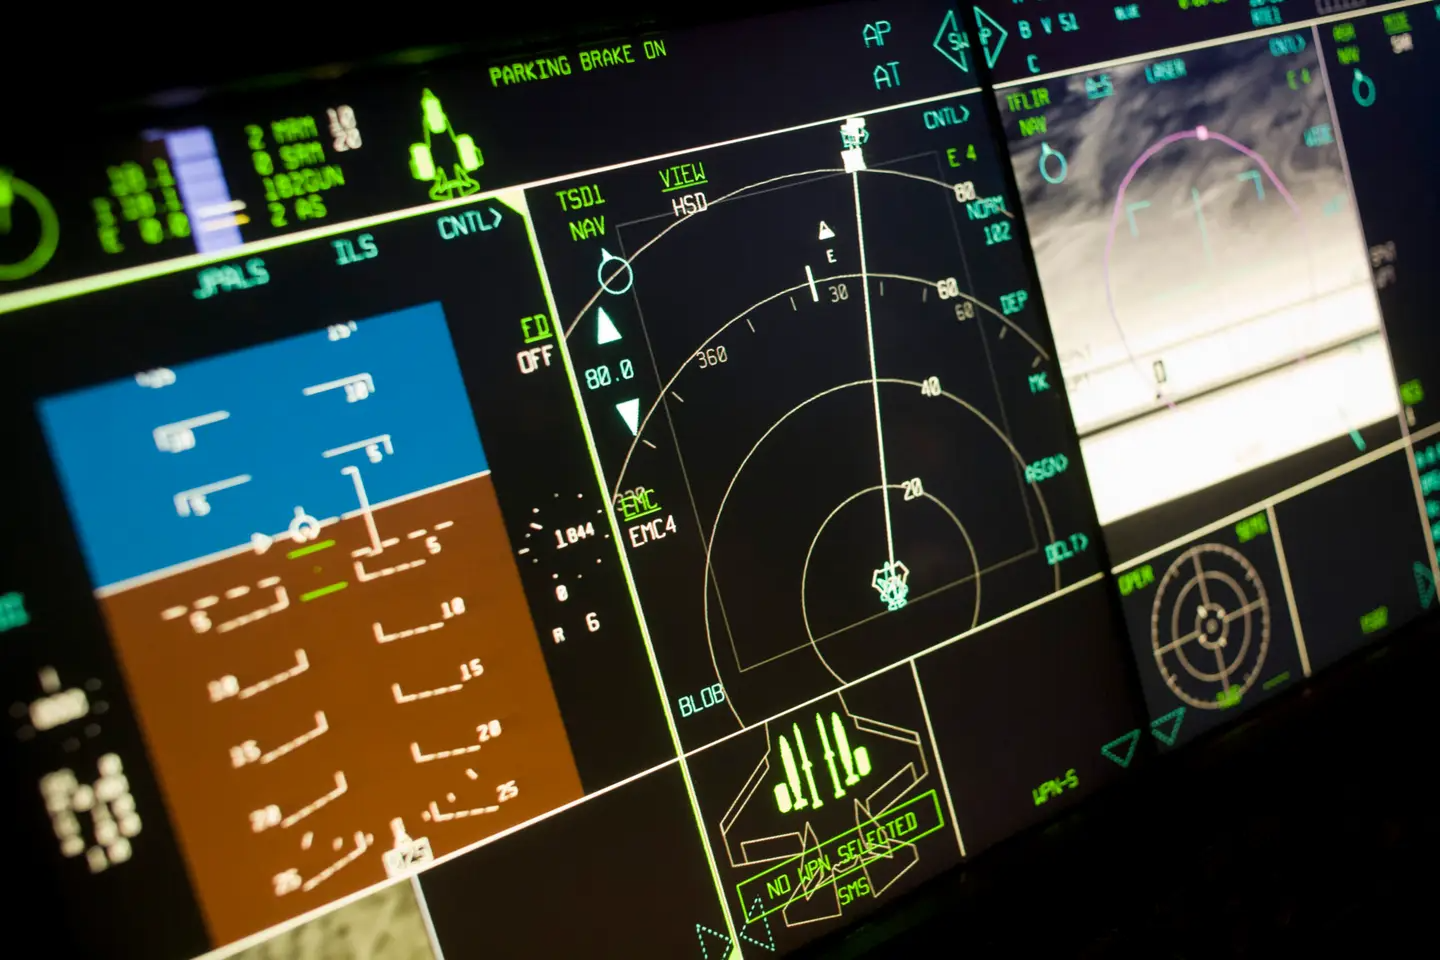 Glowing cockpit instrumentation of a Lockheed Martin F-35 Lightning II stealth fighter.&nbsp;<em>Credit: Photo by In Pictures Ltd./Corbis via Getty Images</em>